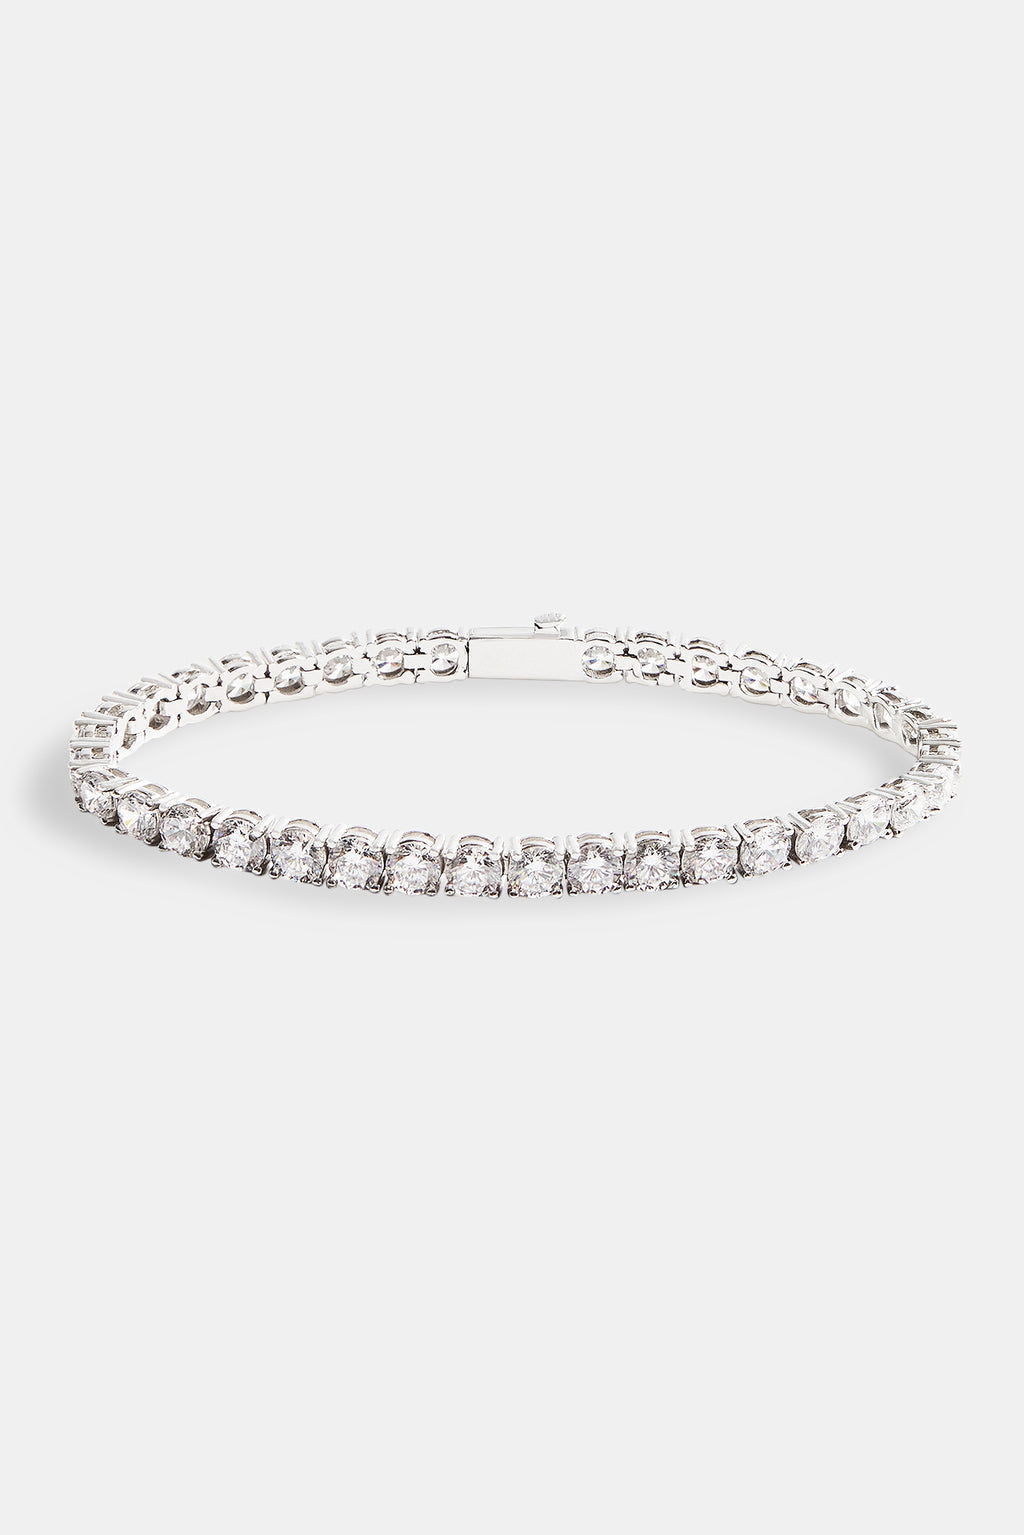 Real Diamonds Round Lab Grown Diamond Tennis Bracelet For unisex, Weight:  25-30 Gram (gold Weight) at Rs 283699 in New Delhi